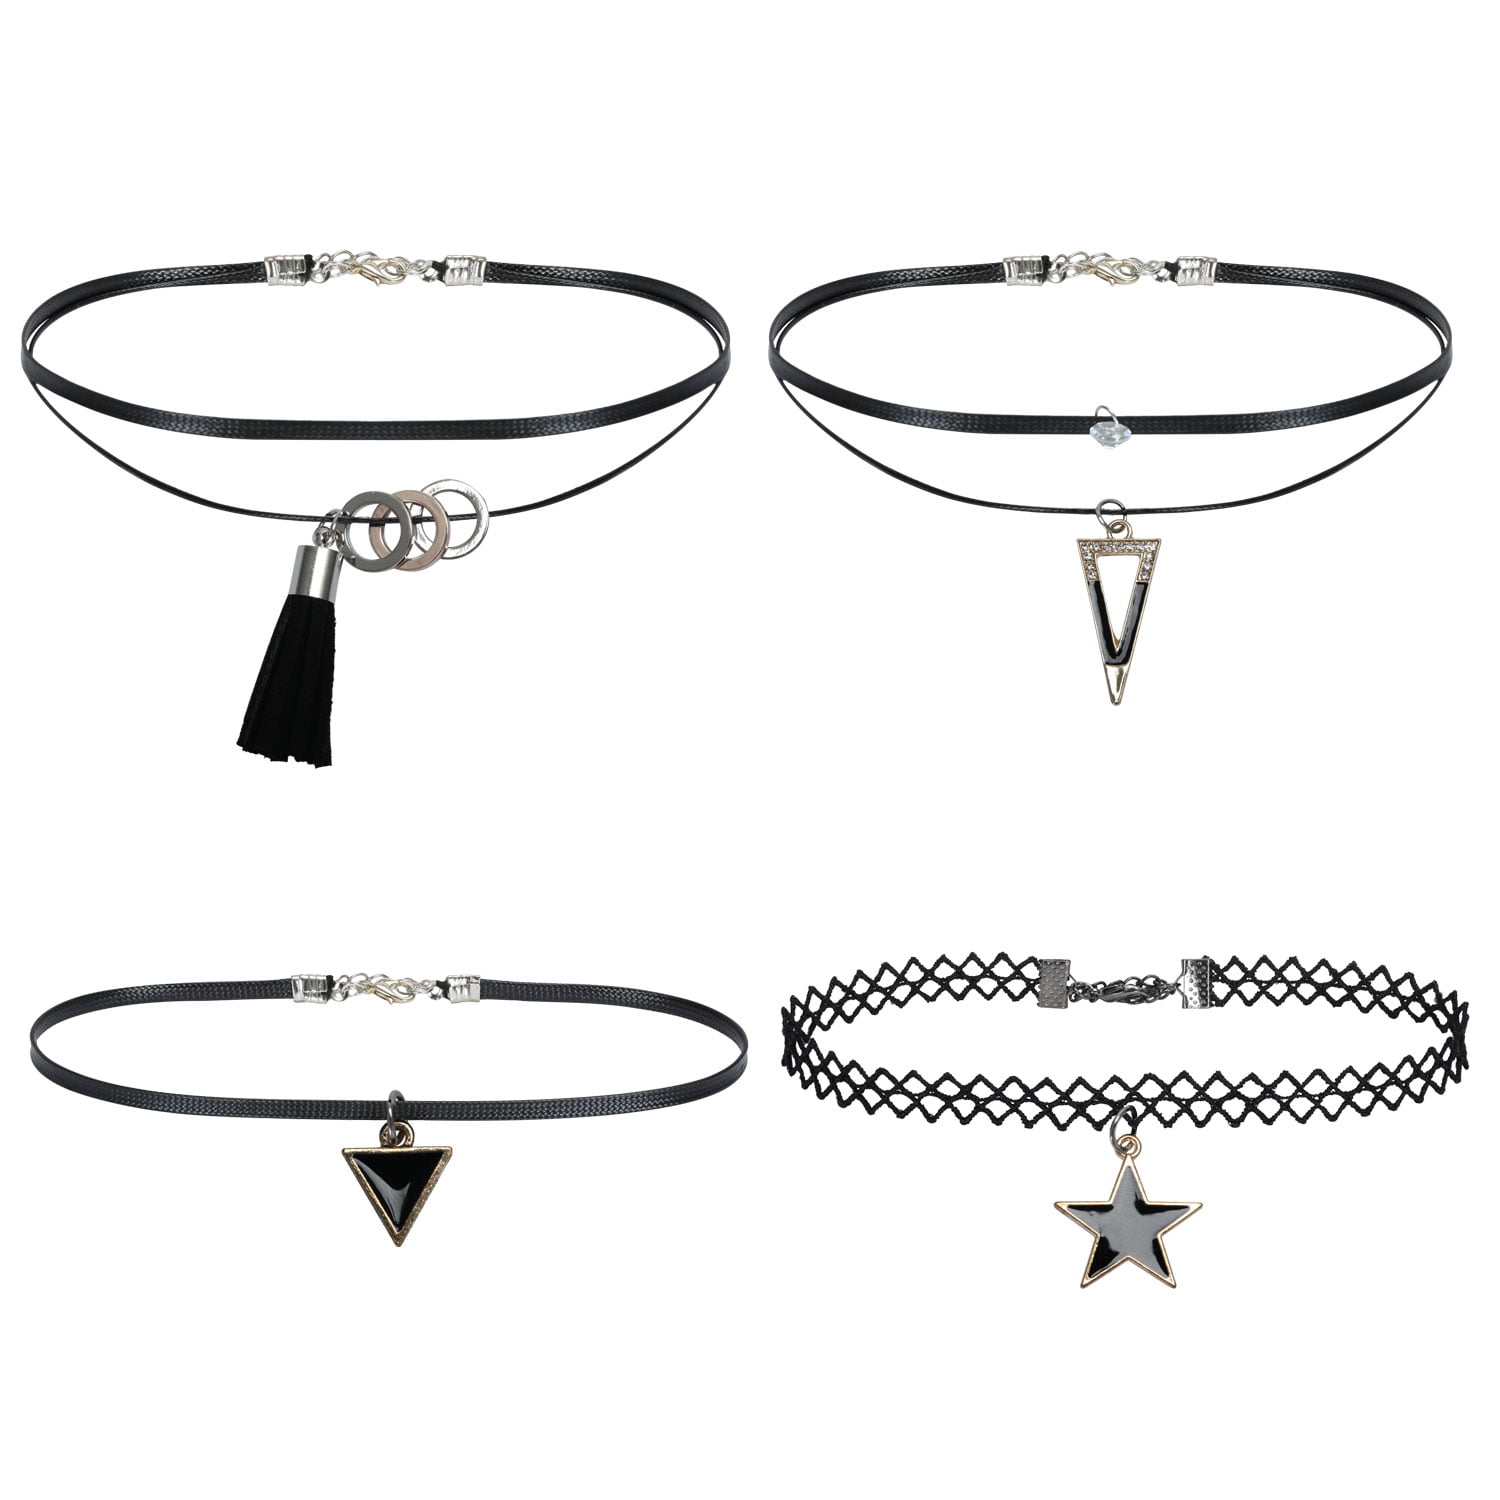 Classic 25mm Width Smooth Latest Fashion Week Style Chokers